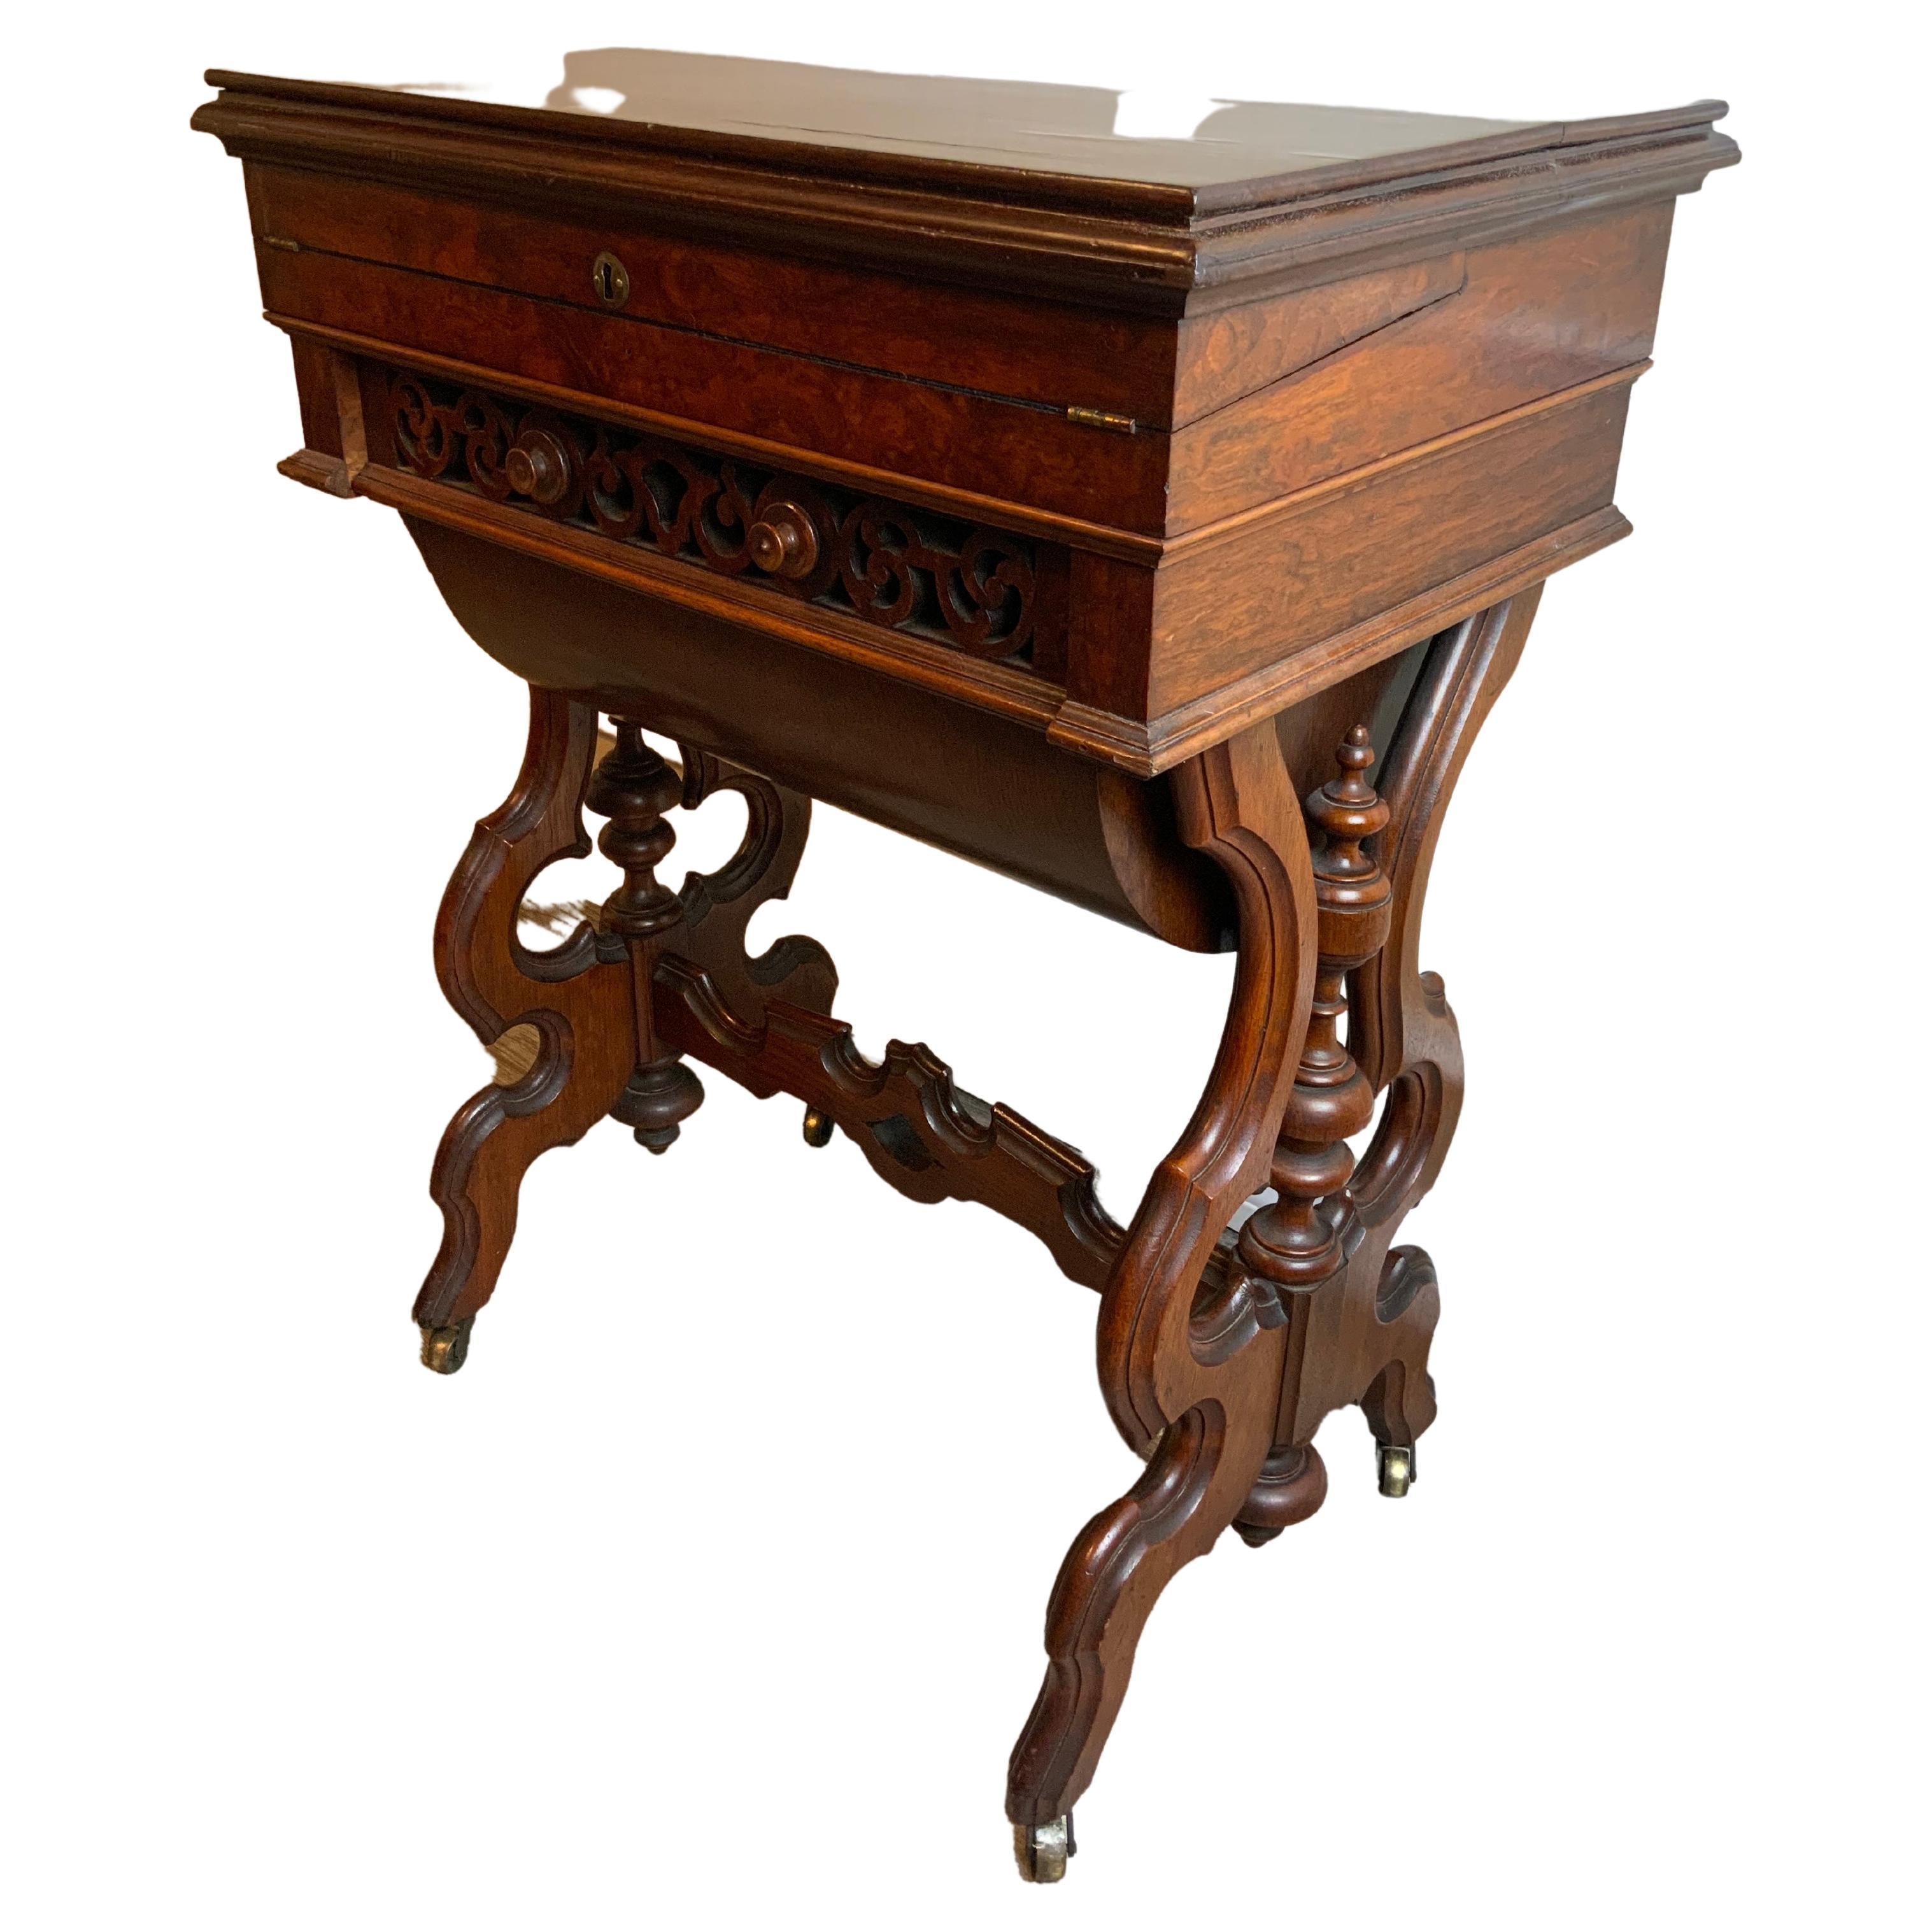 A very nice earl Victorian Burl walnut sewing stand and work table in very good condition.  This unique piece has a fold out writing or work surface under the top lid as seen often in writing slopes or lap desks. There is a large pierced carved pull